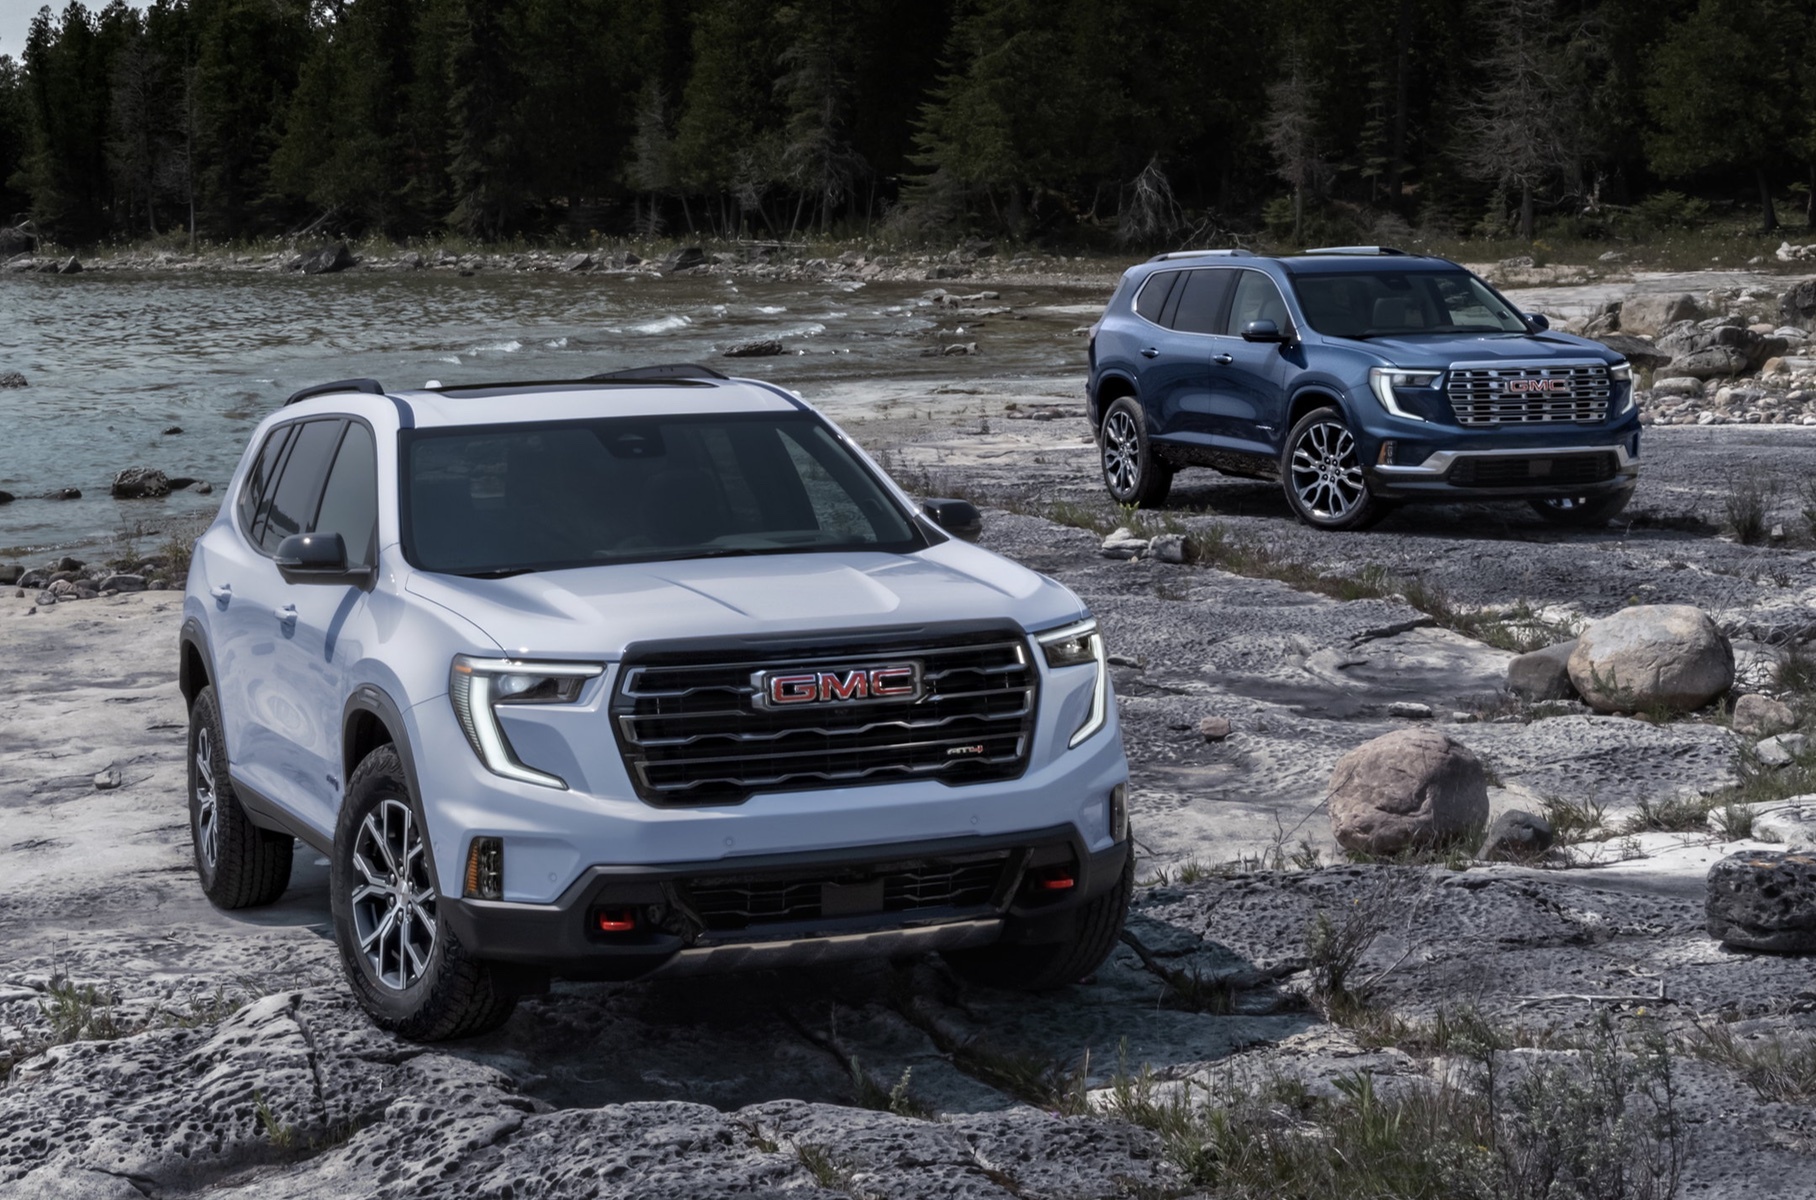 The GMC brand introduced the new Acadia crossover